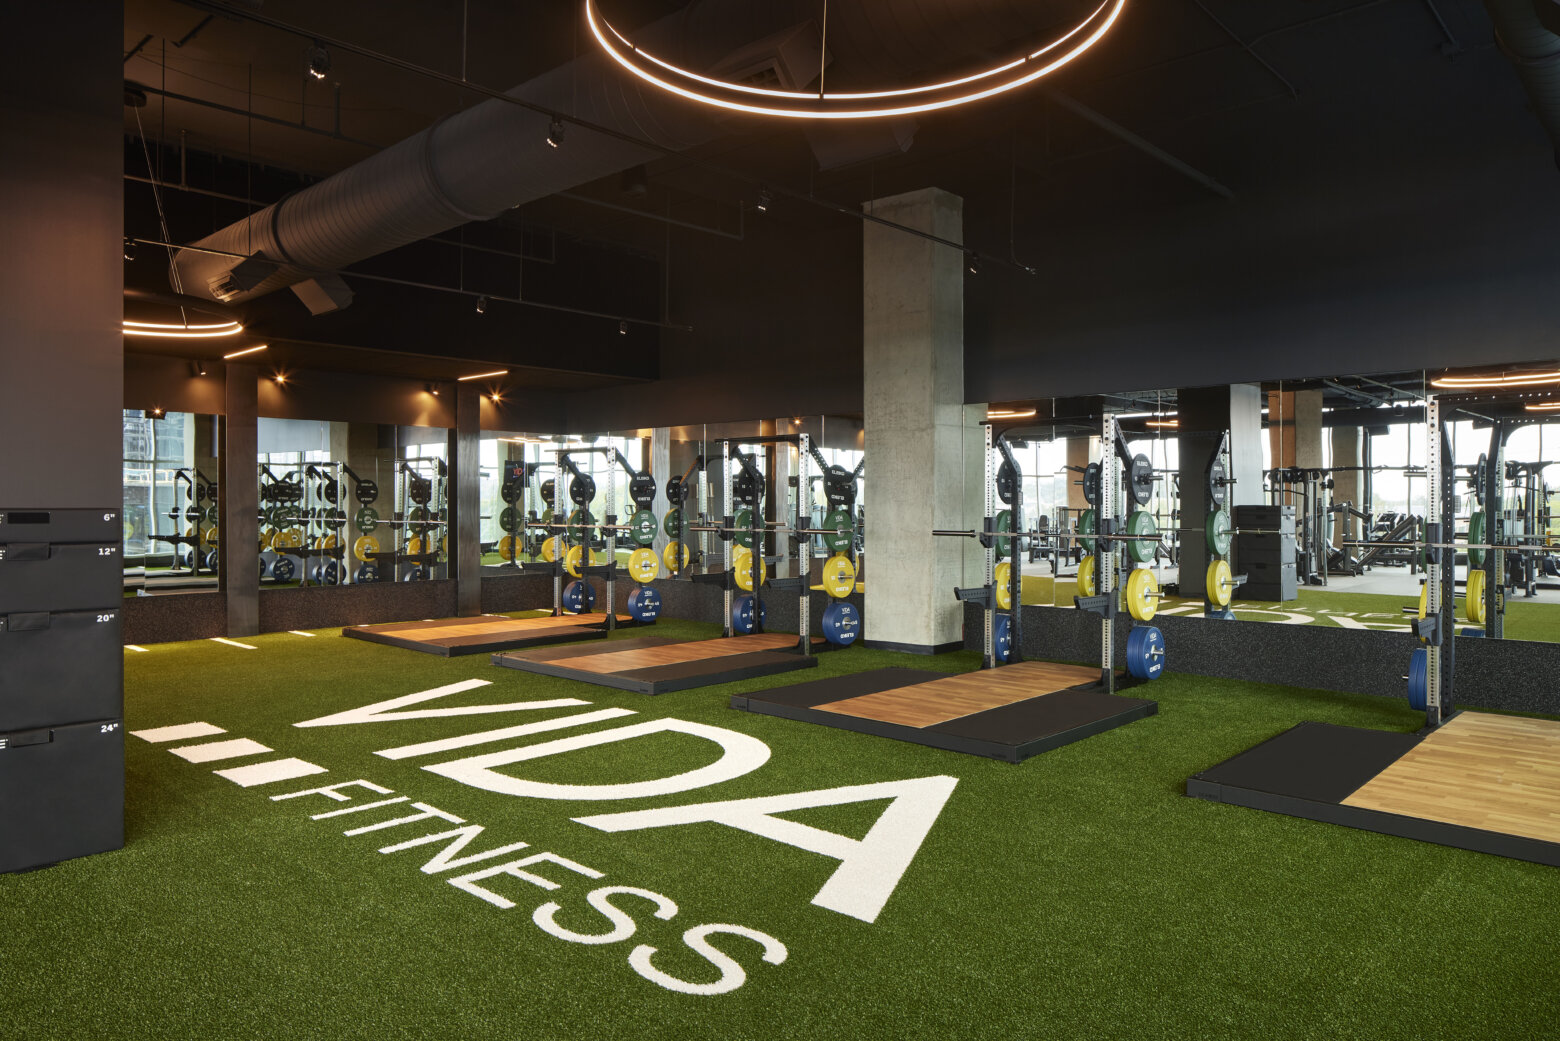 Vida Fitness holds grand opening for Reston Station club